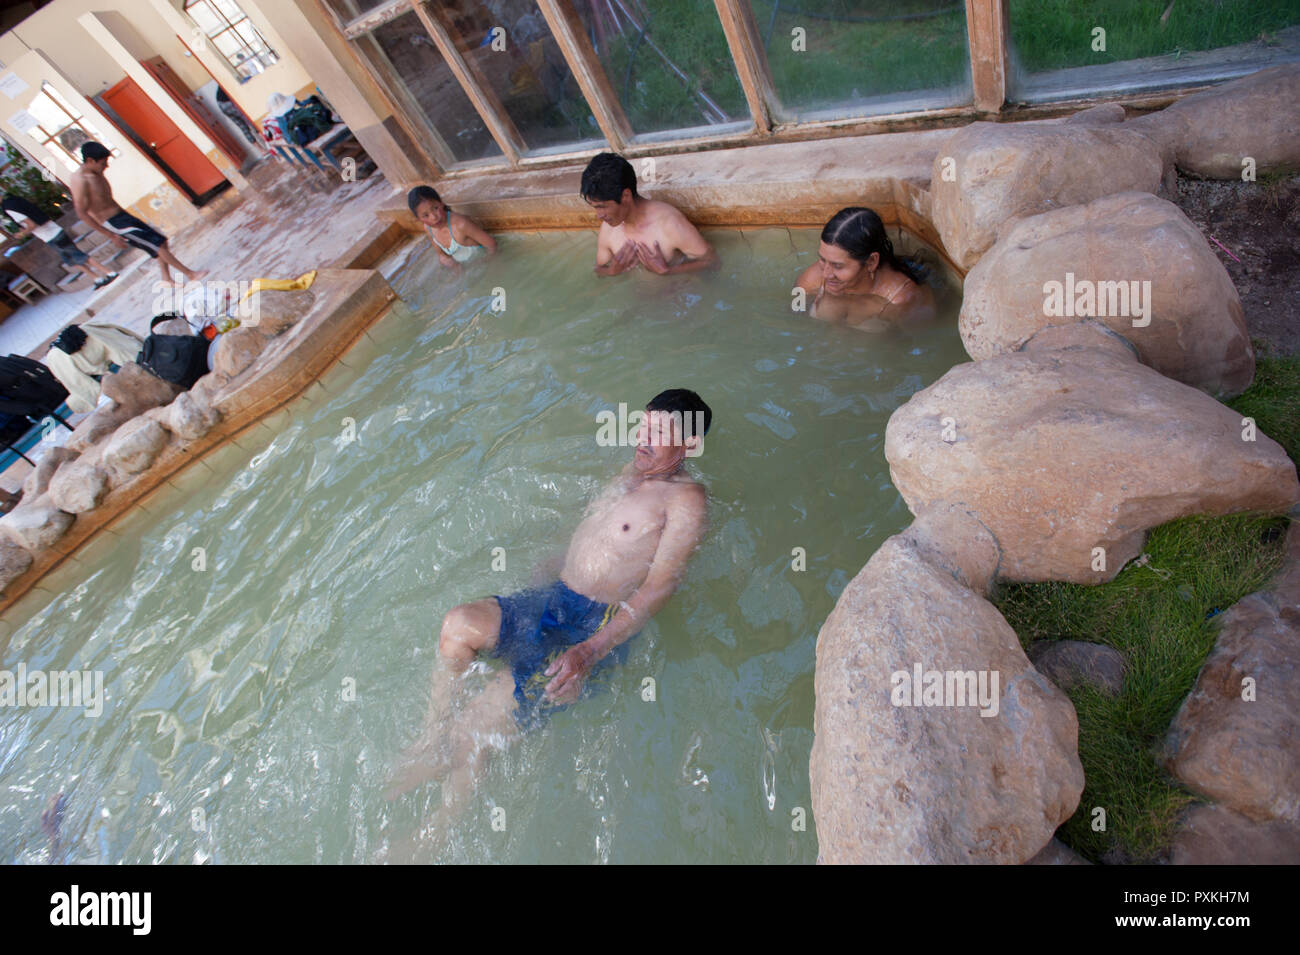 In the small spa swimming pool in the mountains near Calca. Stock Photo